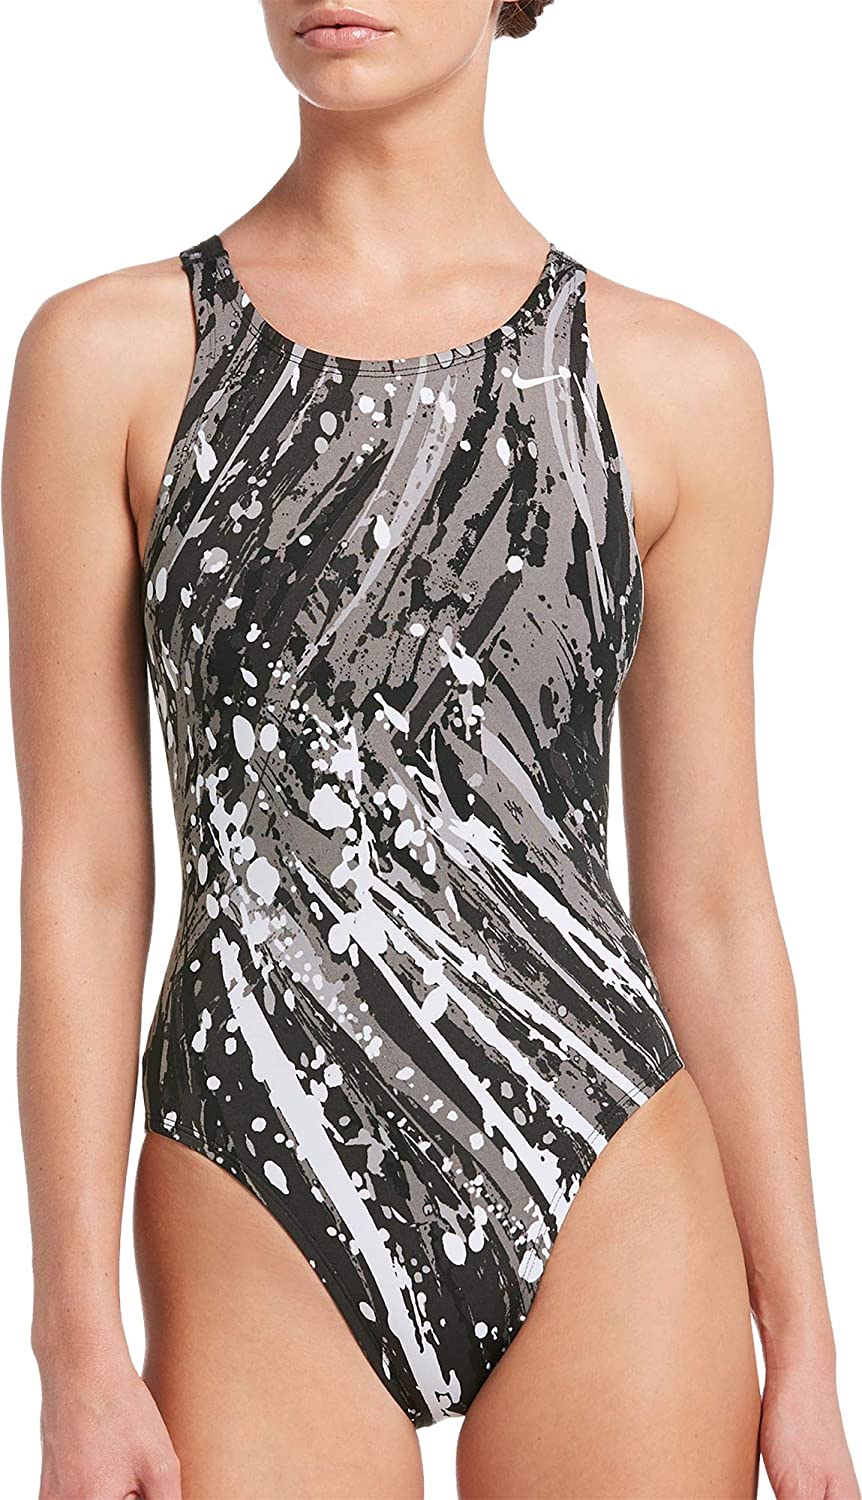 Nike Swim Women's Fast Back One Piece in Black color from the front